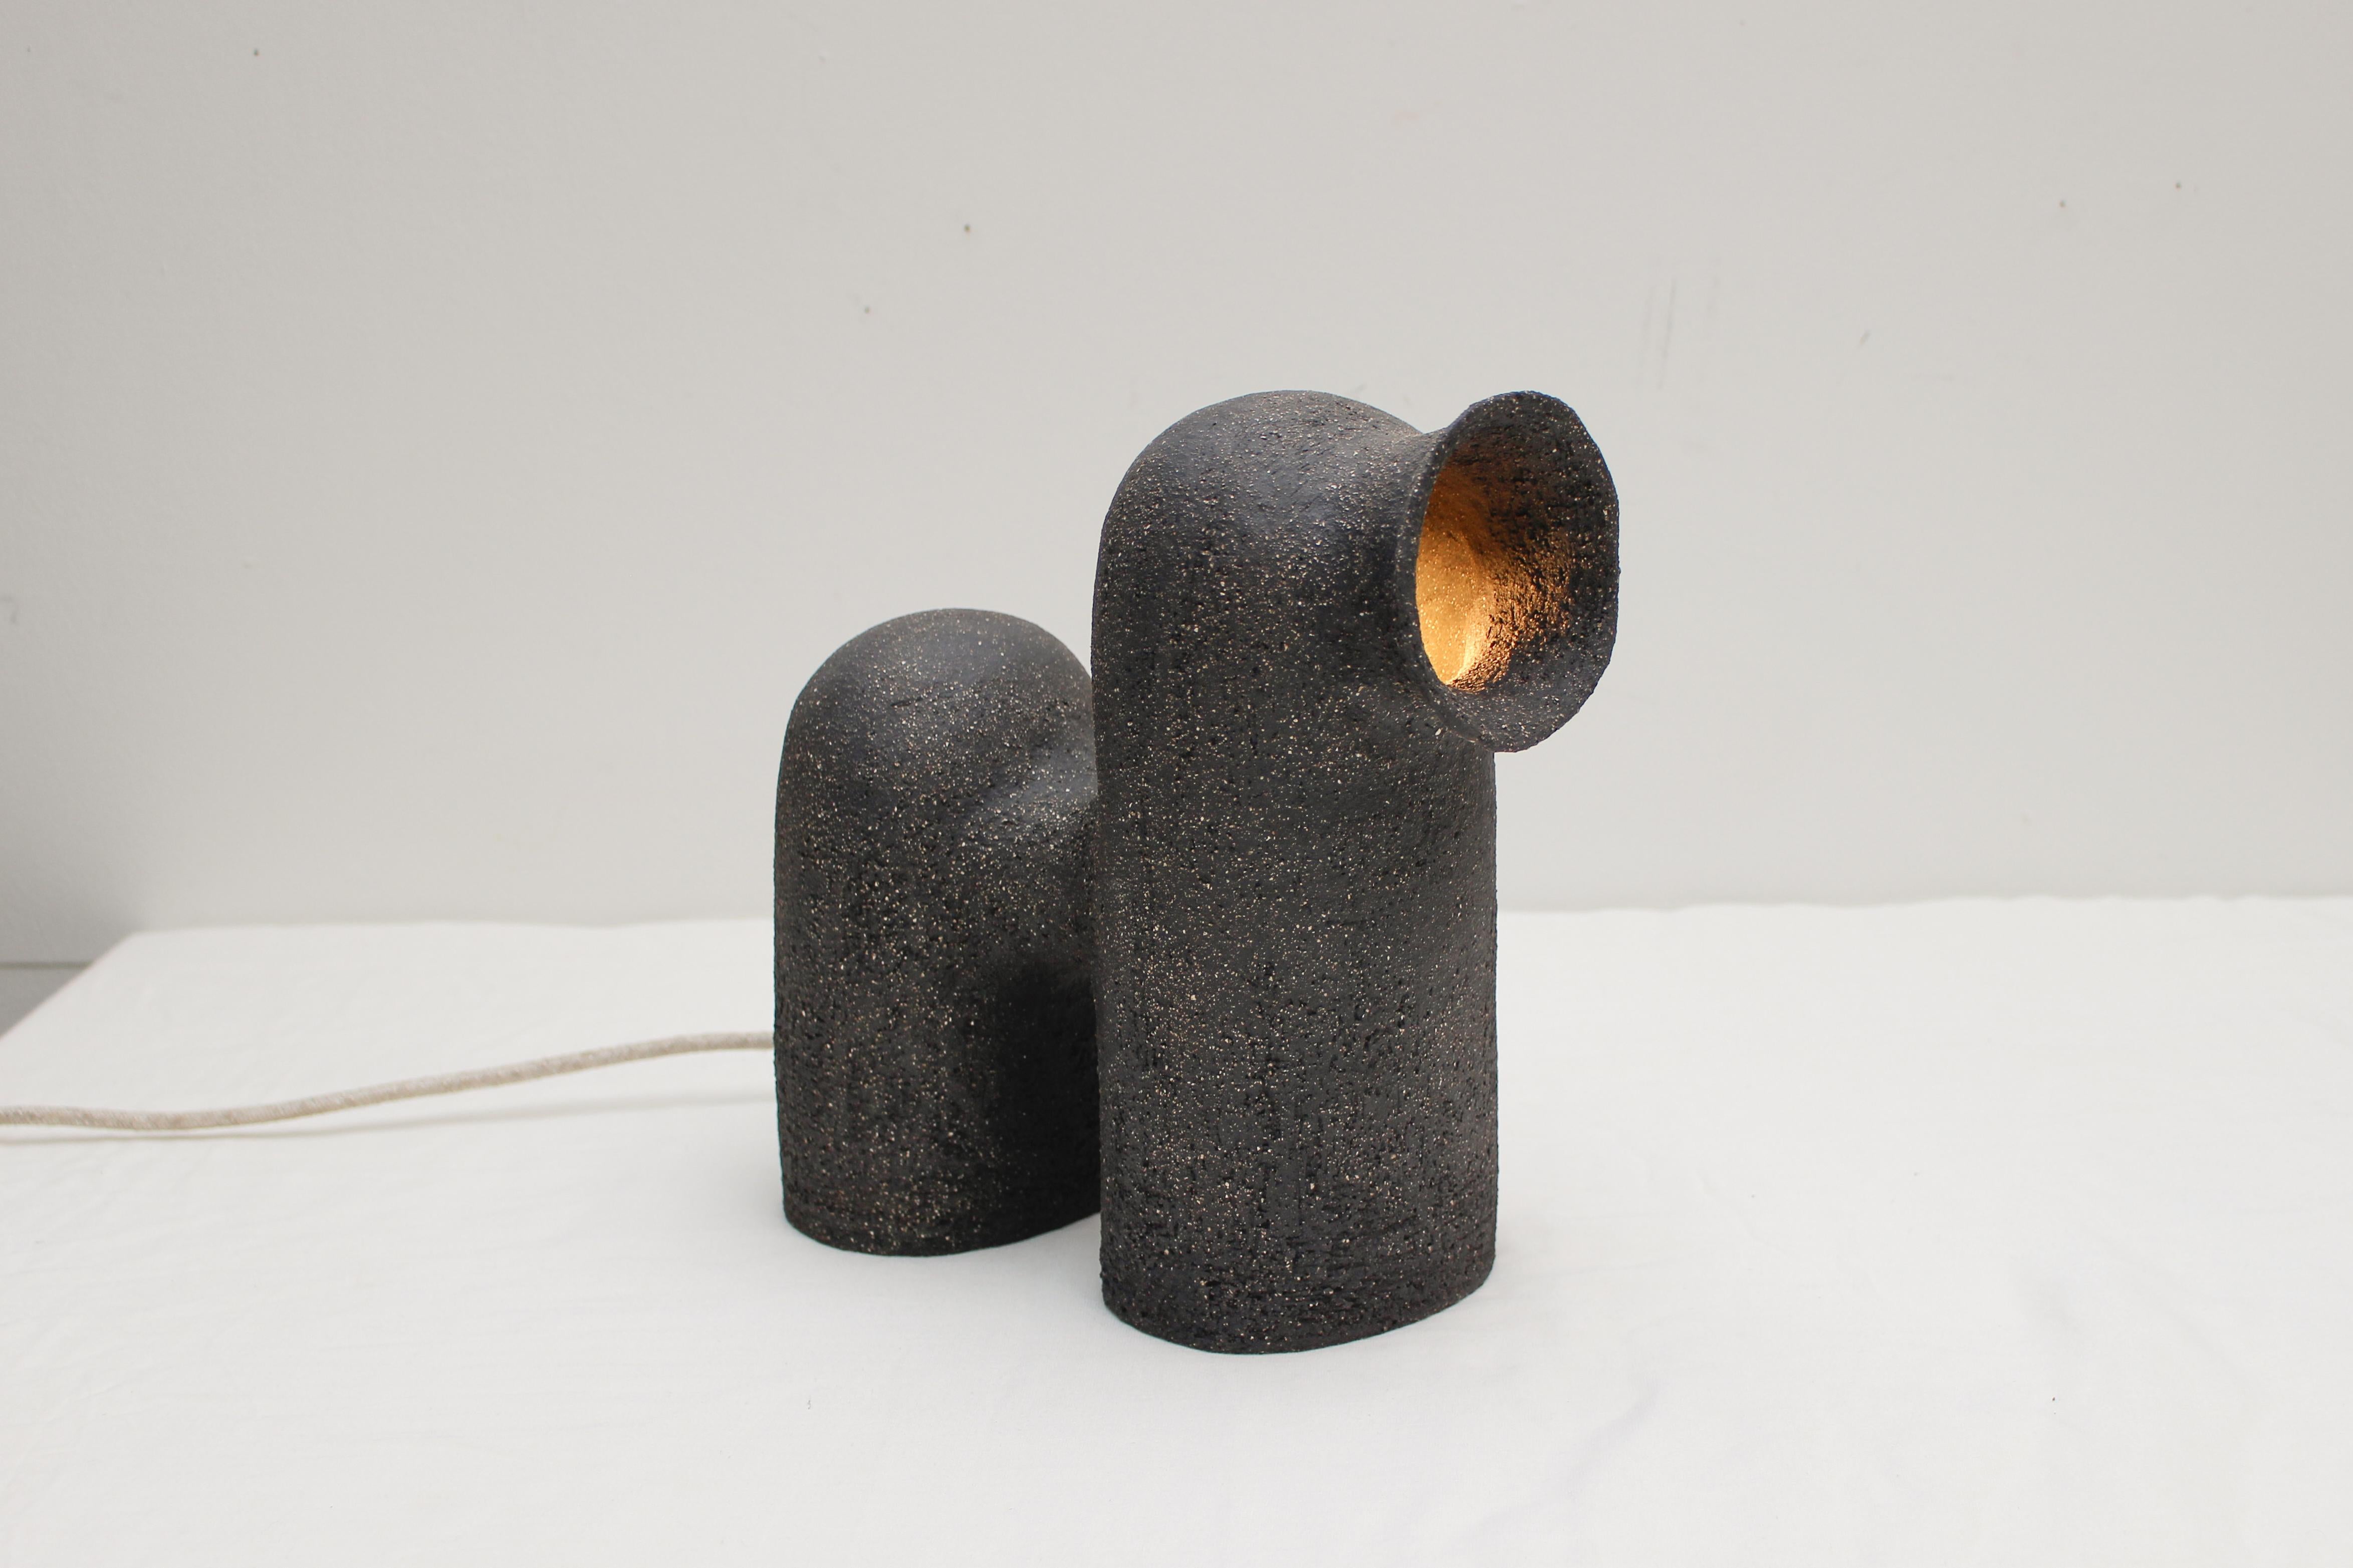 Refuge black stoneware table lamp by Elisa Uberti
Materials: Black stoneware
Dimensions: Around 35cm

After fifteen years in fashion, Elisa Uberti decides to take the time to work with these hands and to give birth to new projects.

Designer